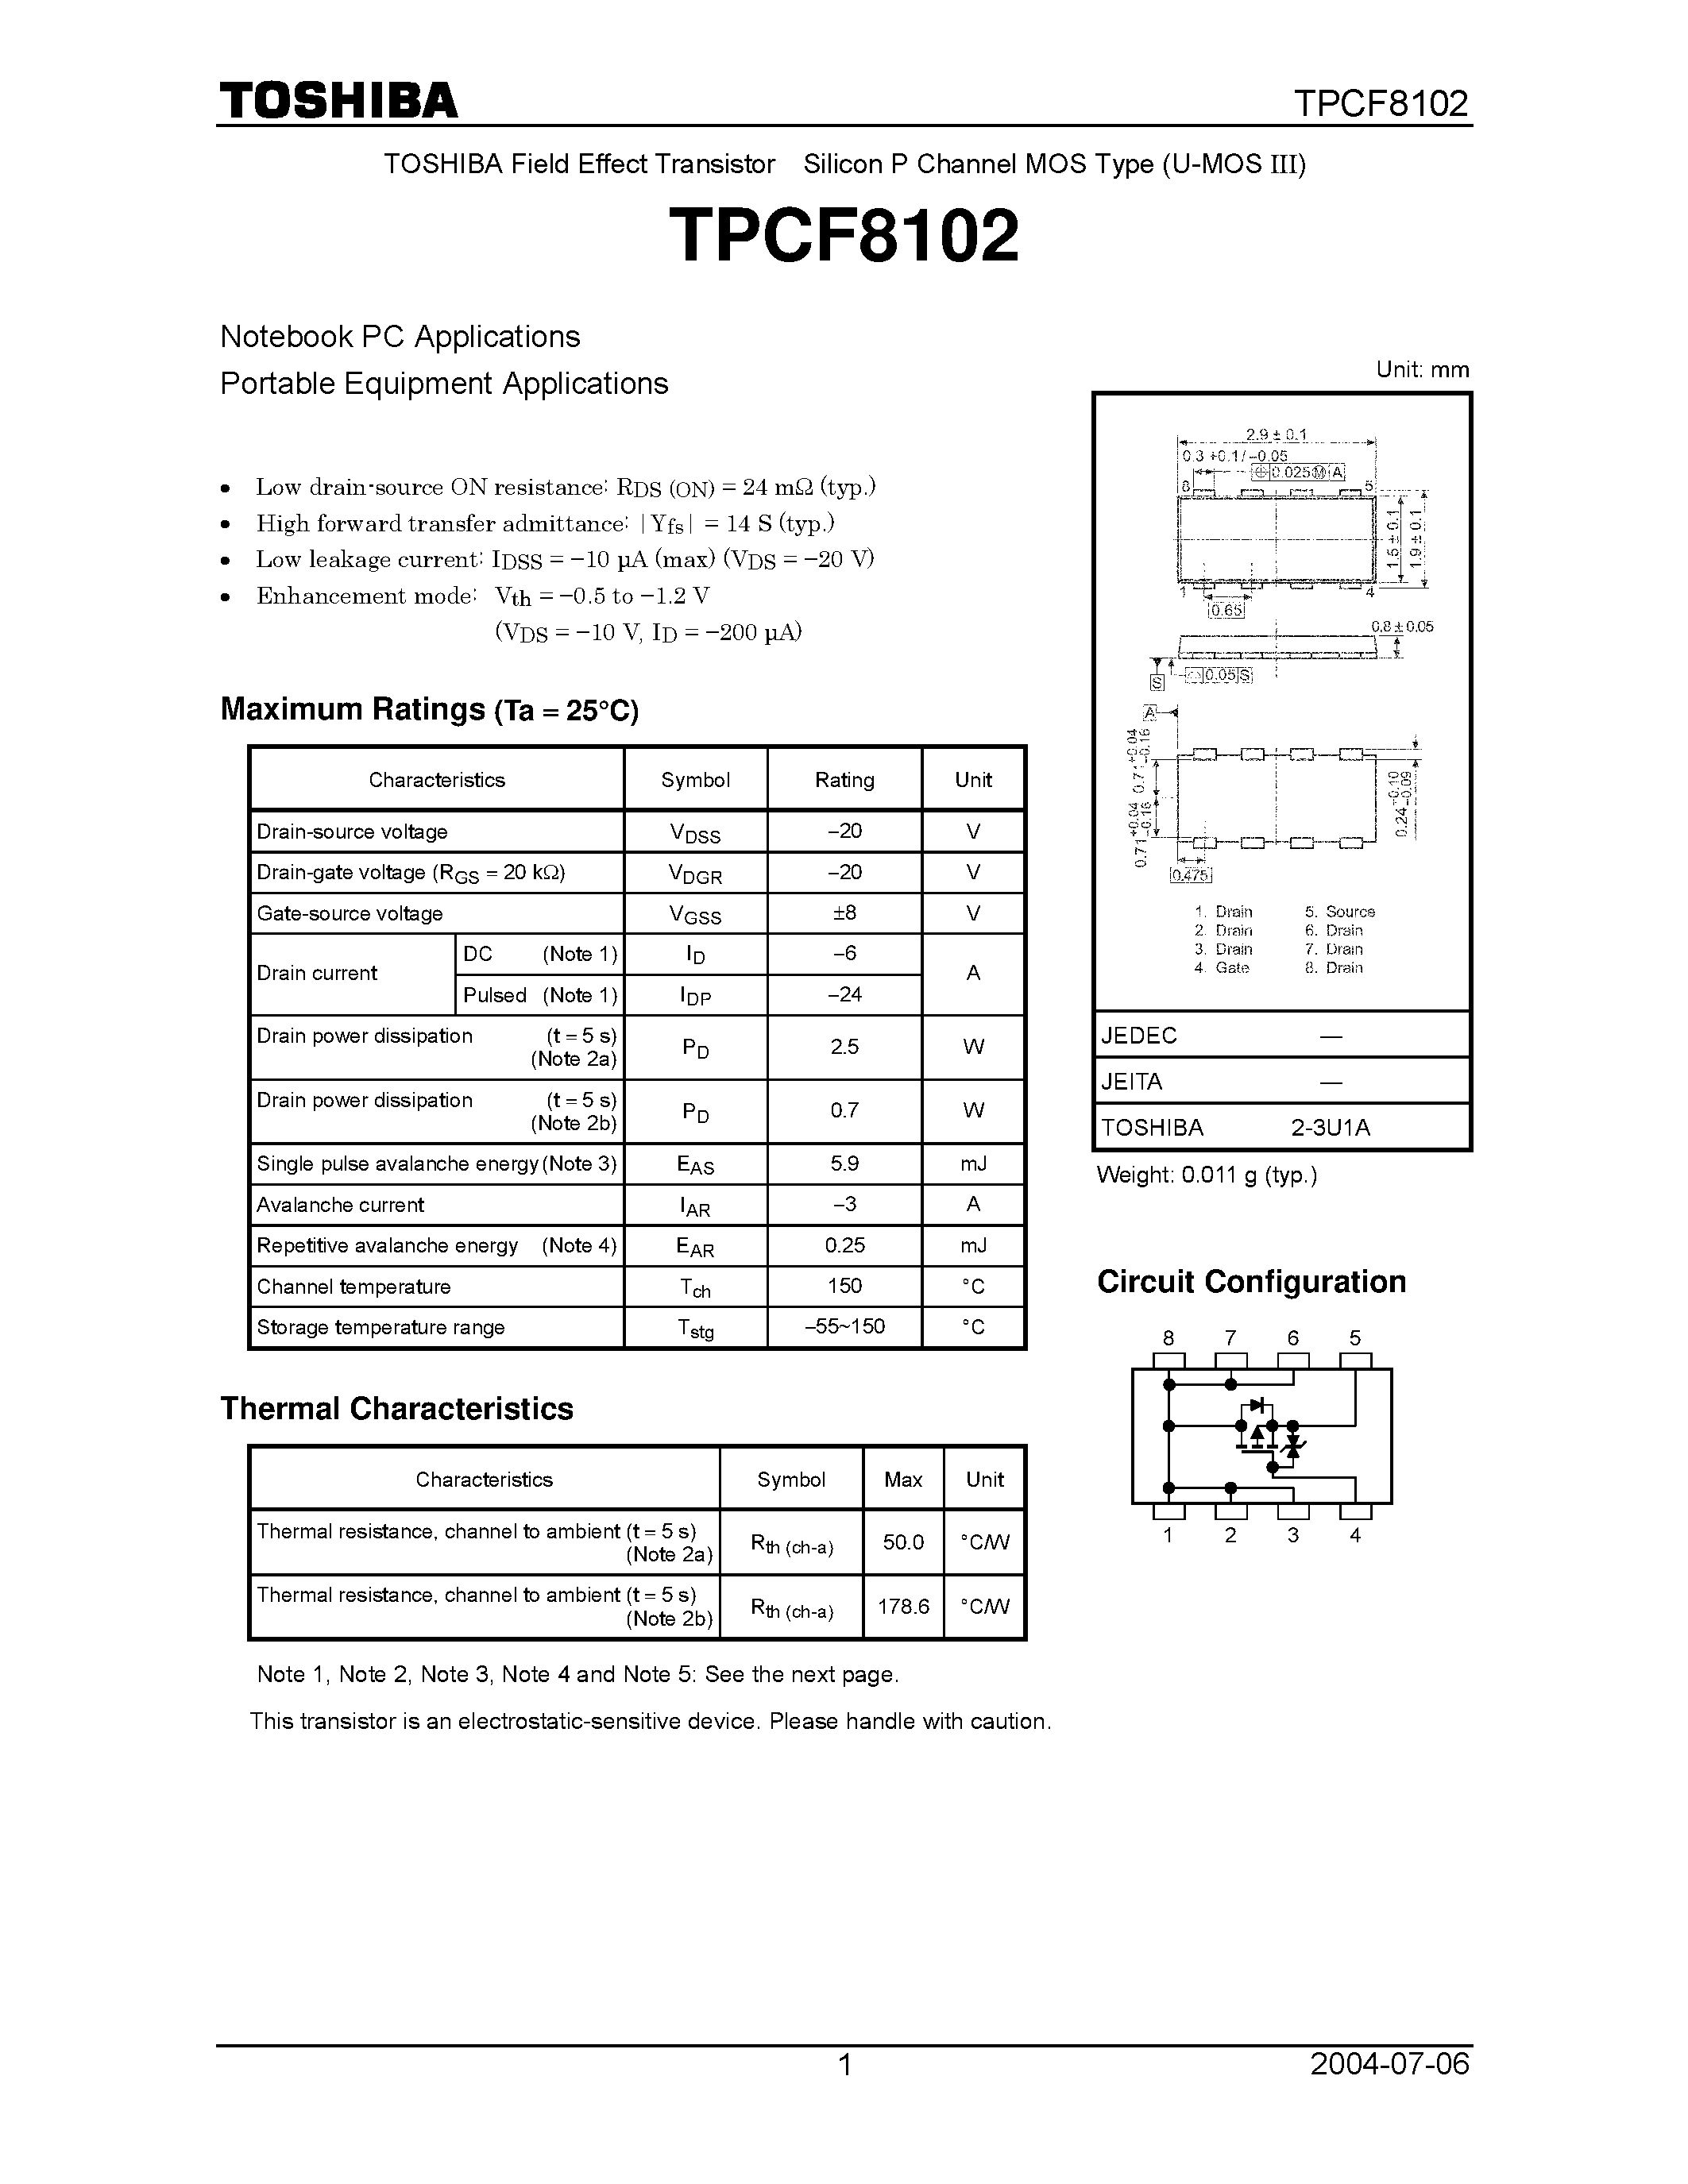 Datasheet TPCF8102 - Field Effect Transistor Silicon P Channel MOS Type (U-MOS III) page 1